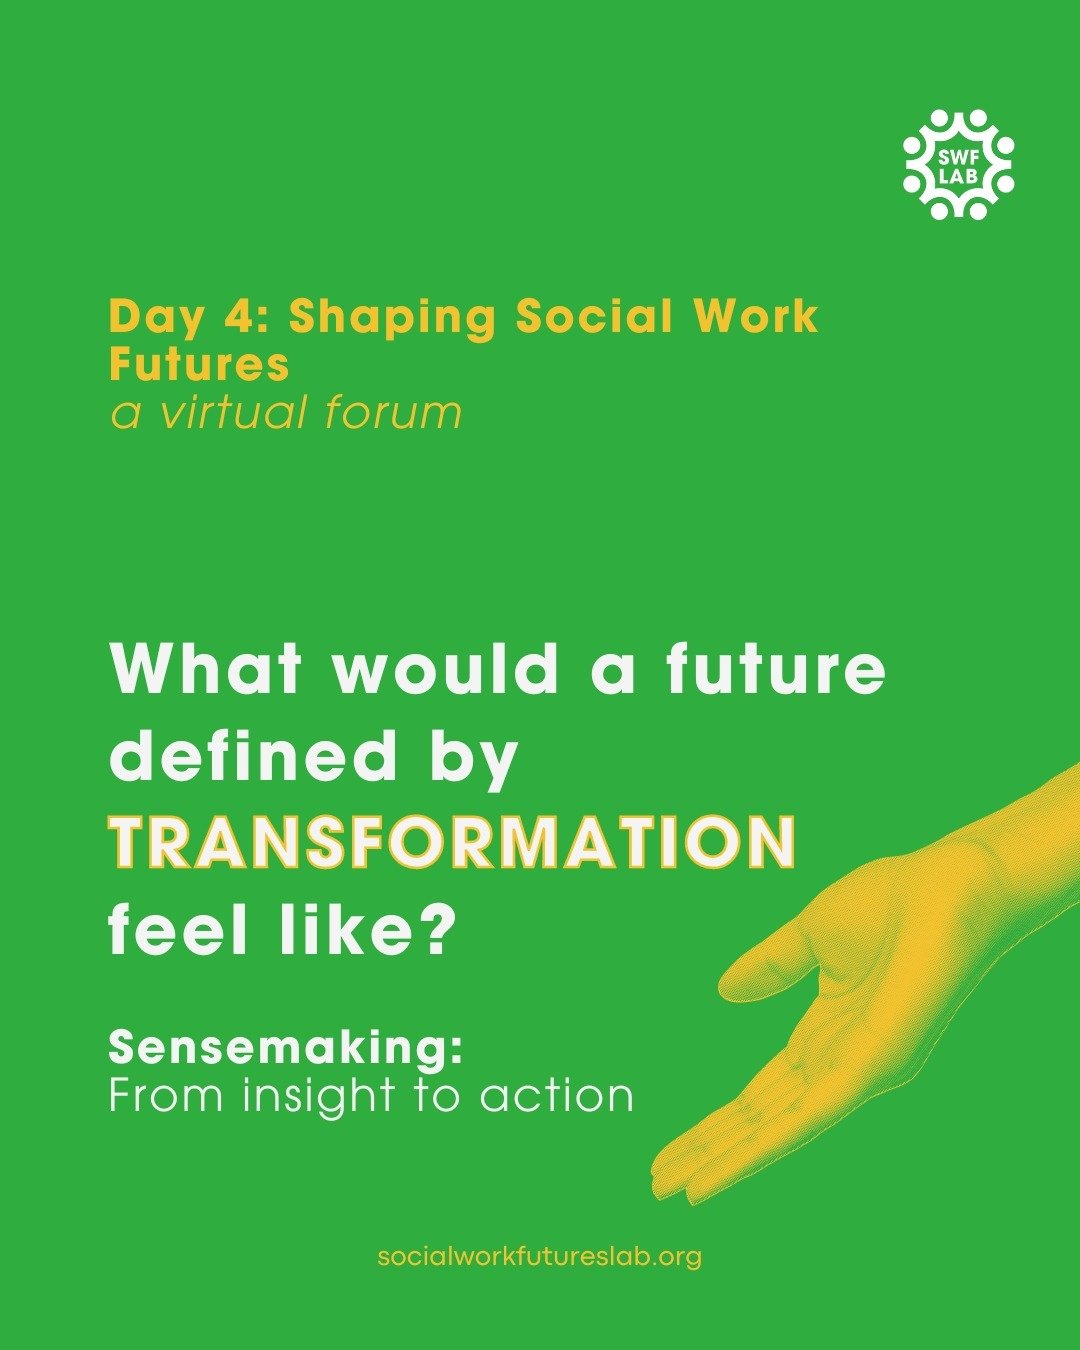 It's the final day of Shaping Social Work Futures: Utopias, Dystopias, and Everything in Between! Today we move towards a future of transformation. Keep the conversation going during the conference by tagging your social media posts, #SWFuturesForum2